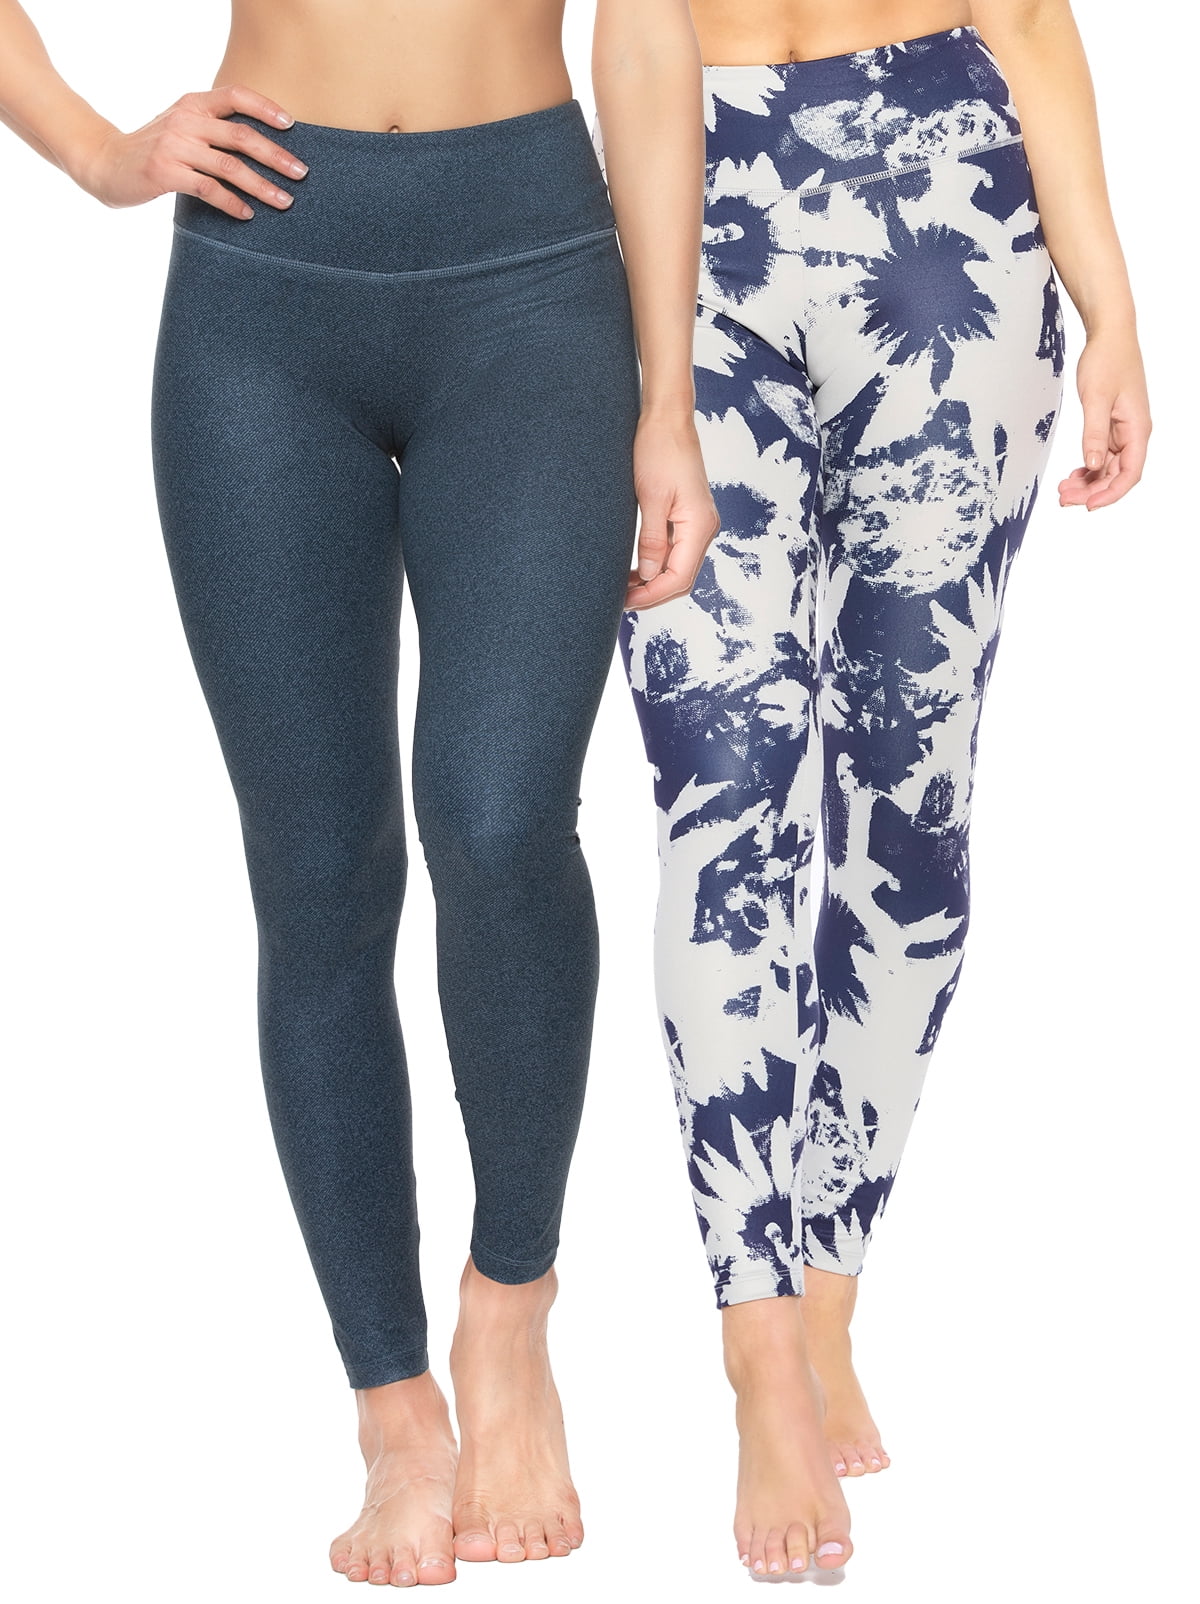 Felina Sueded Athleisure Performance Legging (2-Pack) Womens Leggings  w/Slimming Waist Band Style: C3690RT (Shadow Floral Denim, XX-Large) 